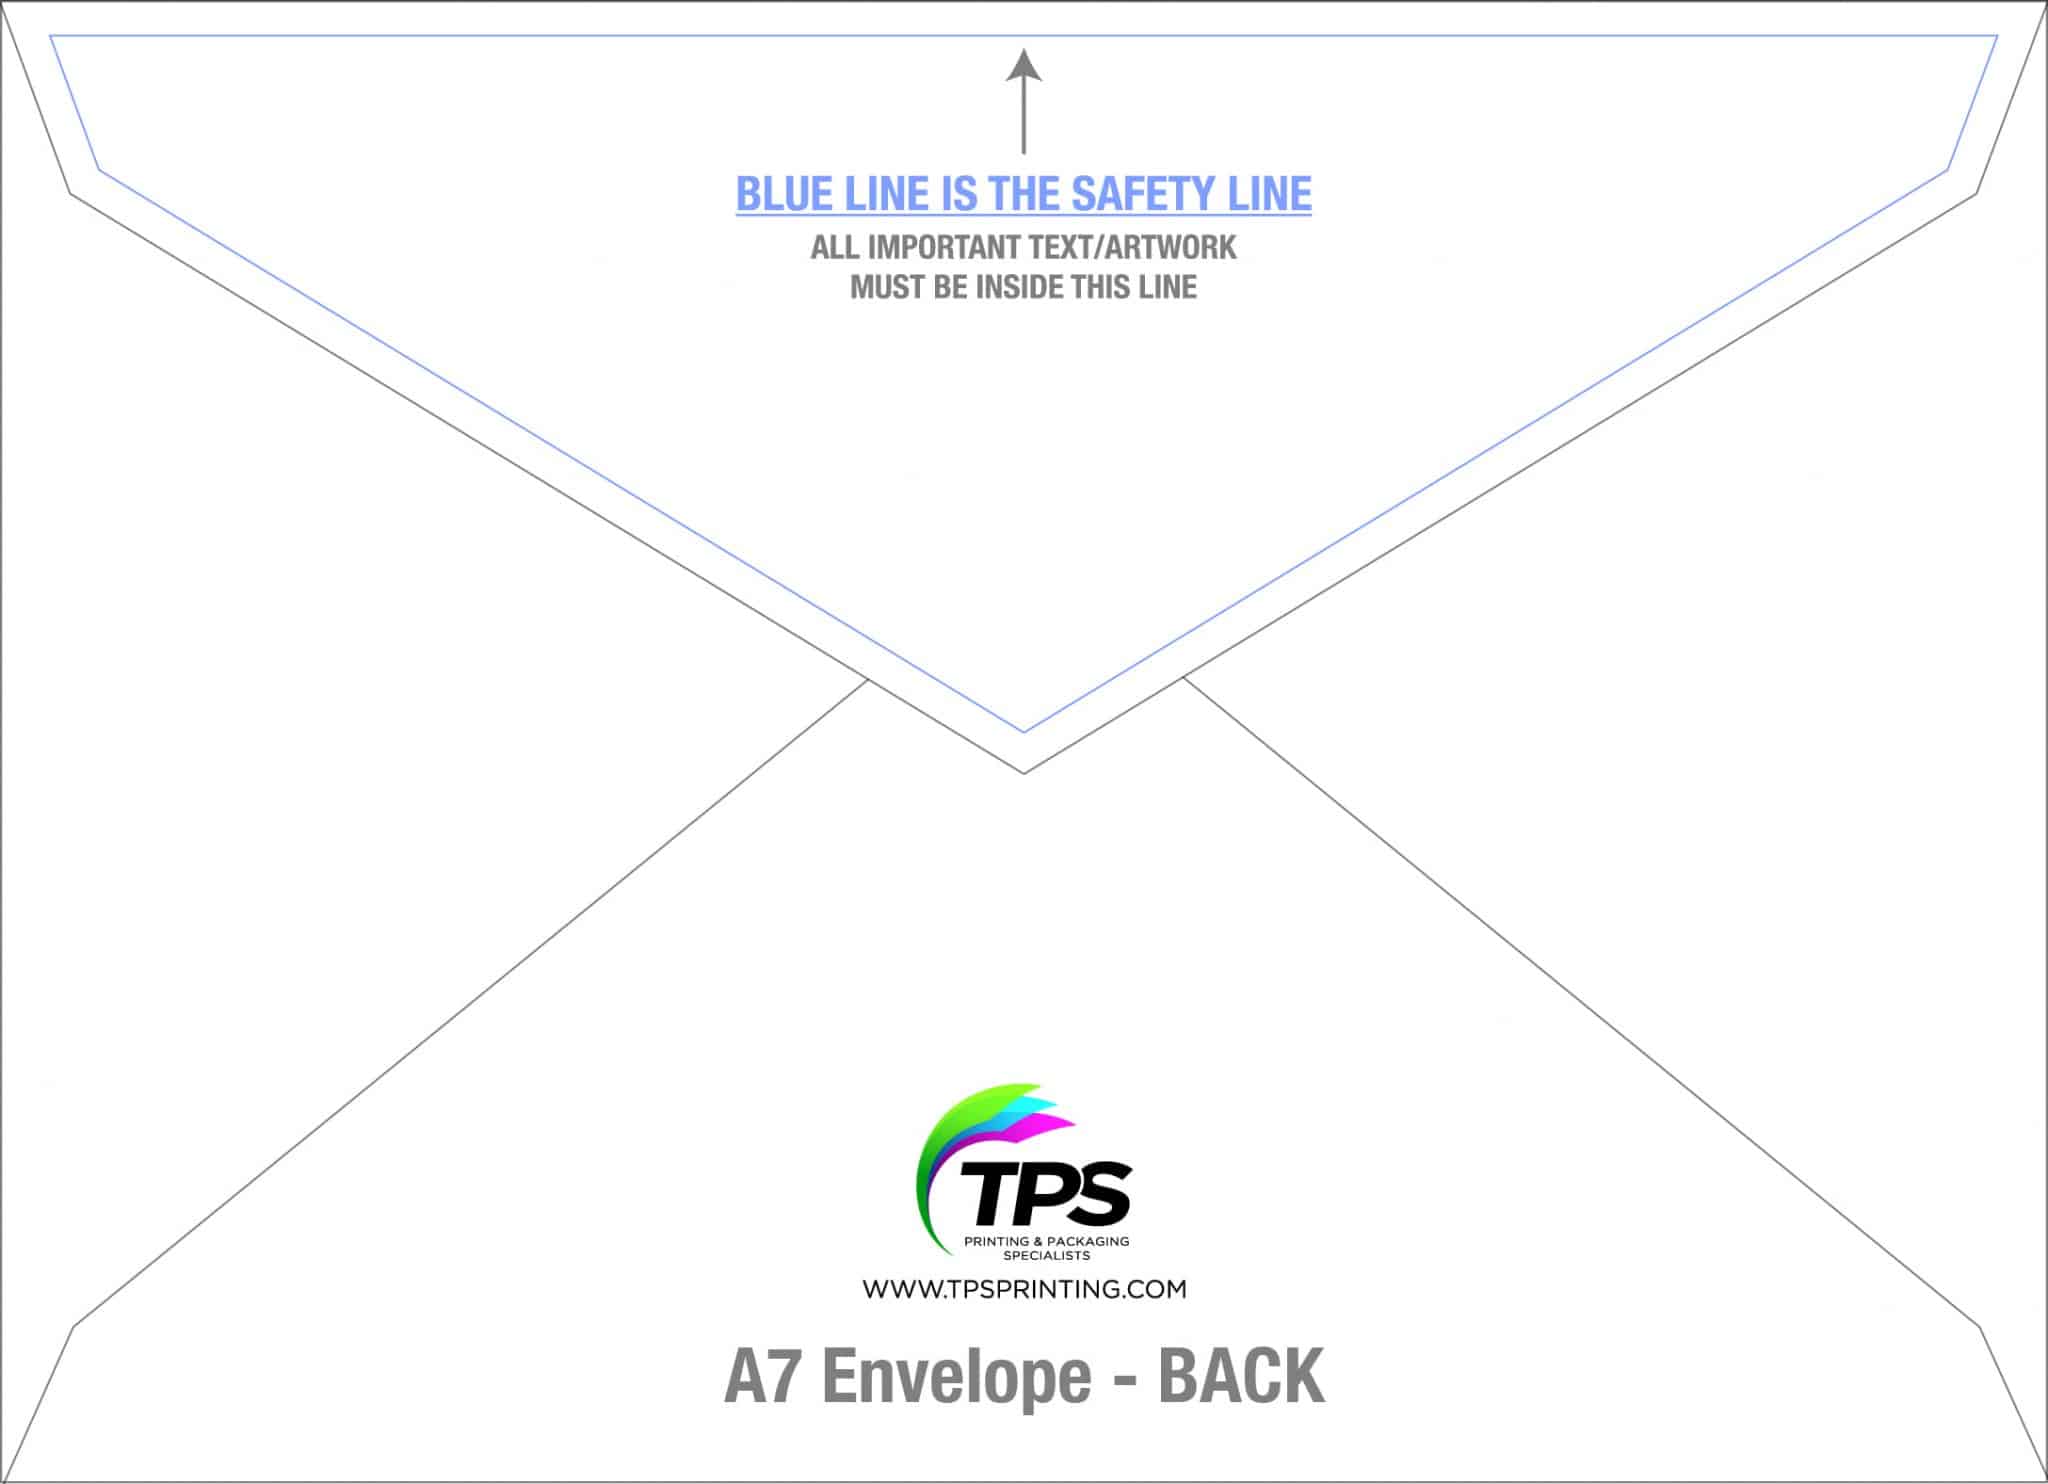 download free printing templates in pdf or jpg file formats